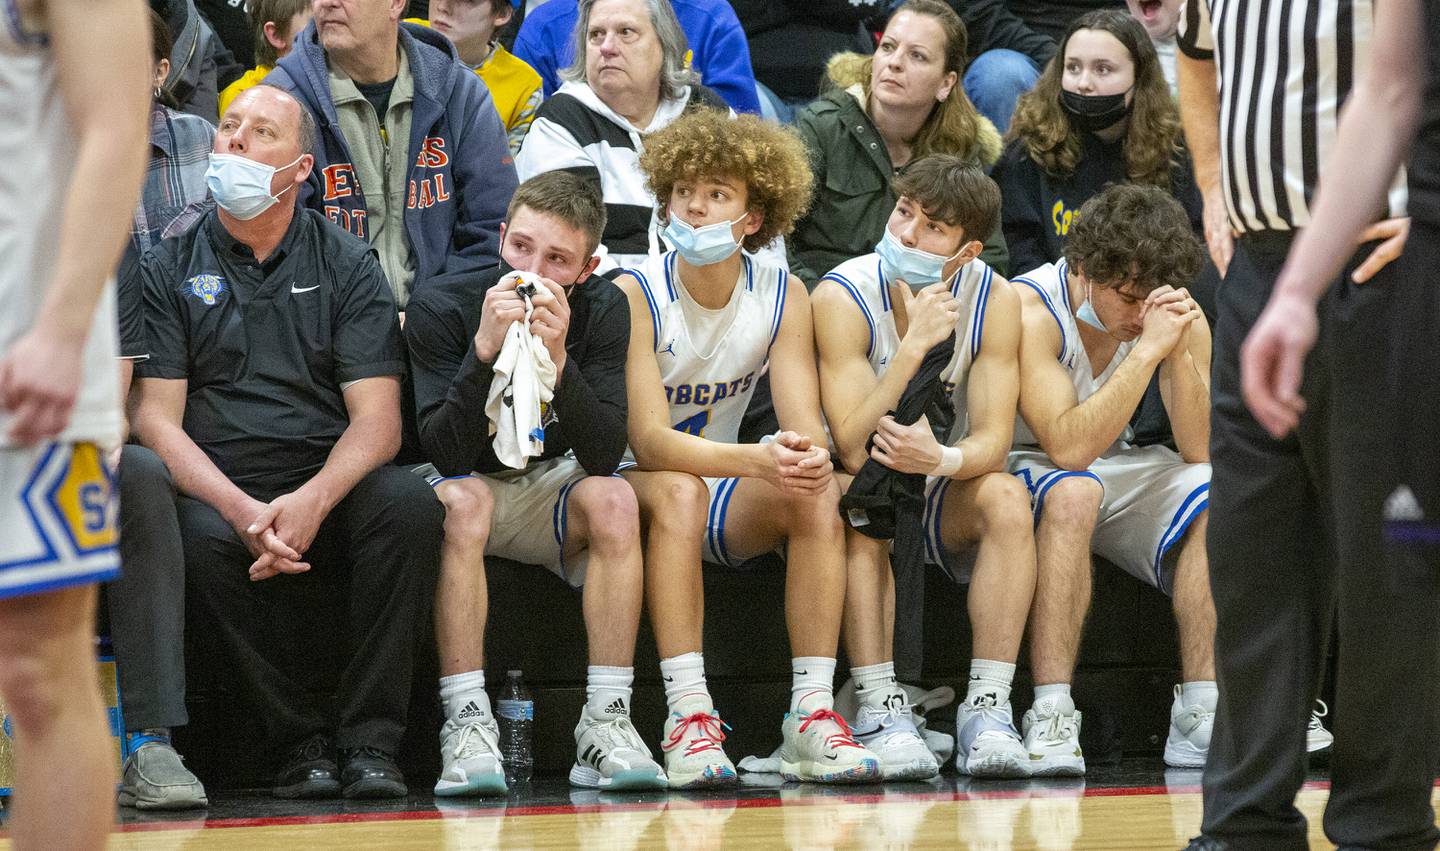 Members of the Somonauk boys basketball team watch the final seconds from the bench in the Class 1A Indian Creek Regional title game on Friday, Feb. 25, 2022, at Indian Creek High School in Shabbona.